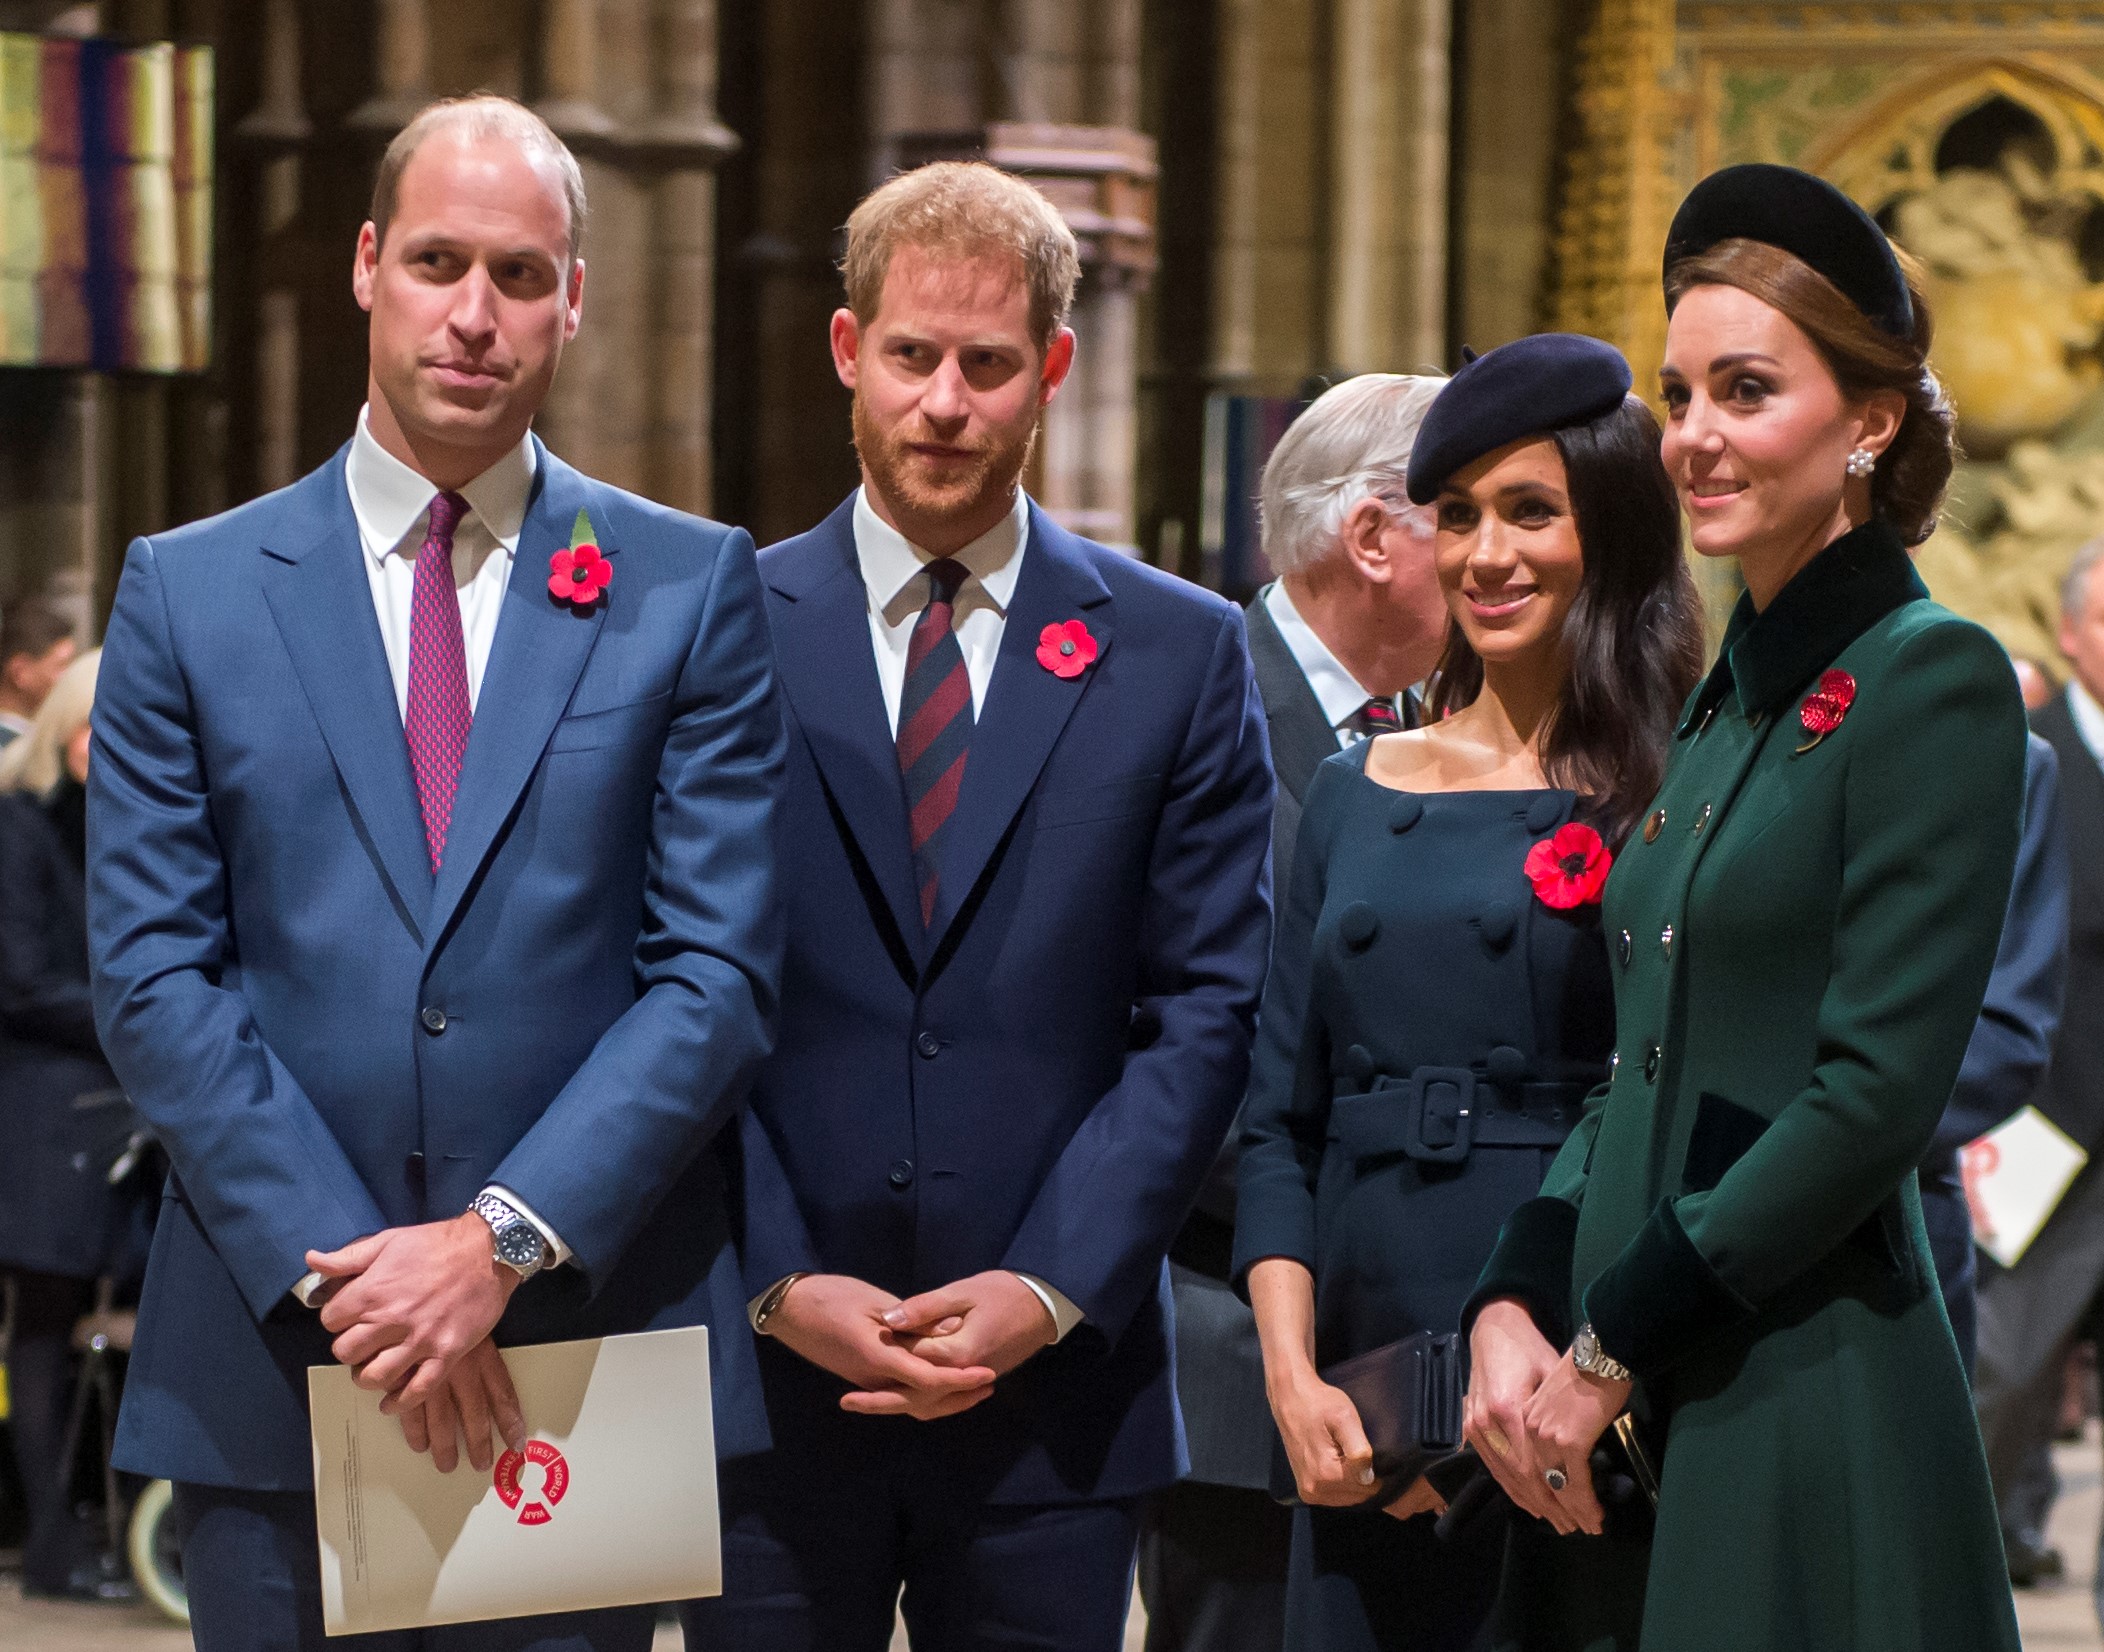 Prince William, Kate Middleton, Prince Harry, and Meghan Markle attend a service together marking the centenary of WW1 armistice